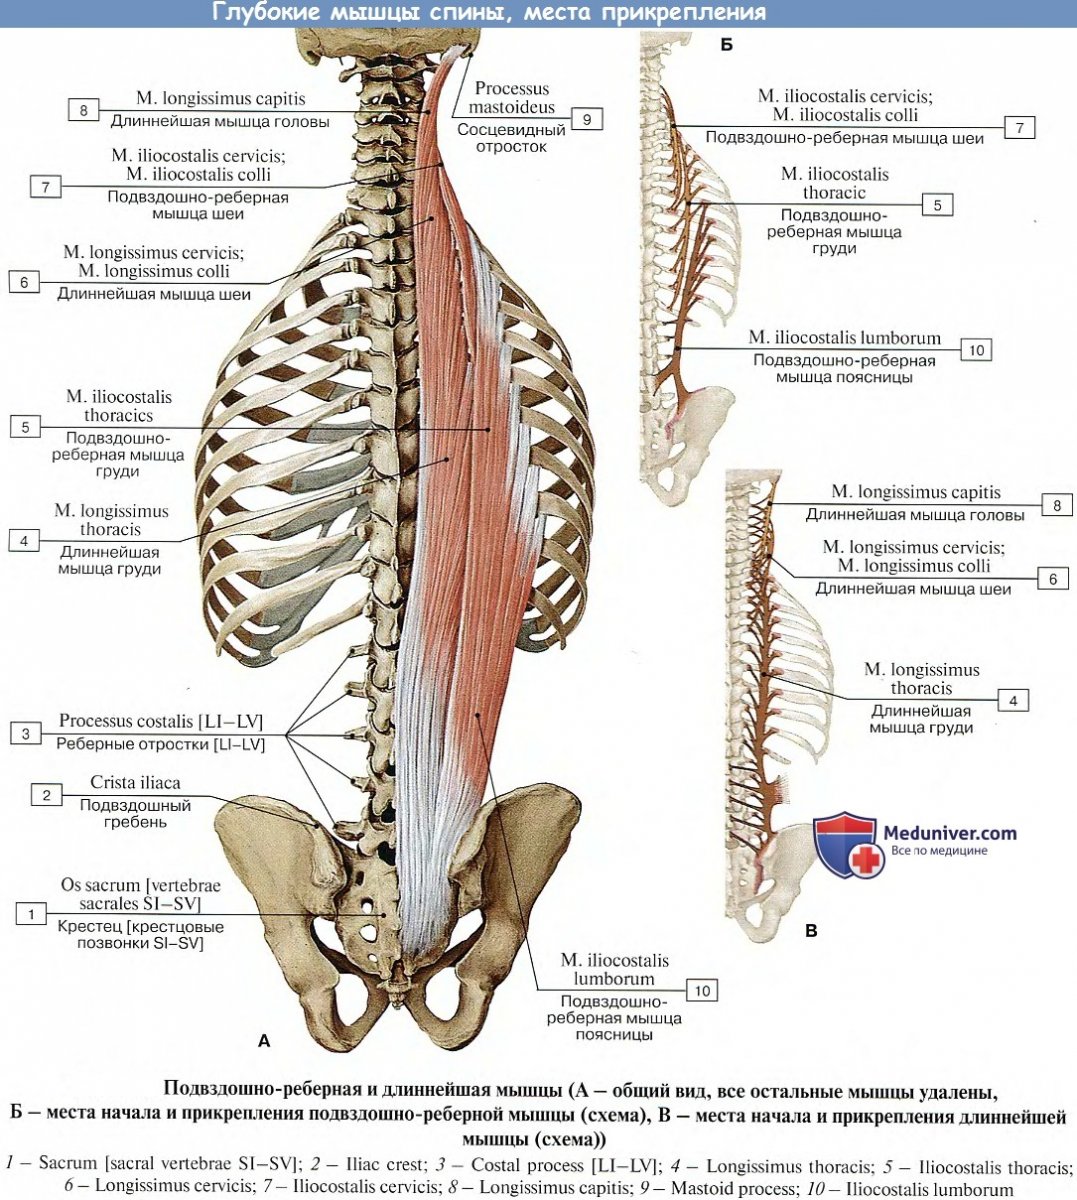 Musculi interspinales